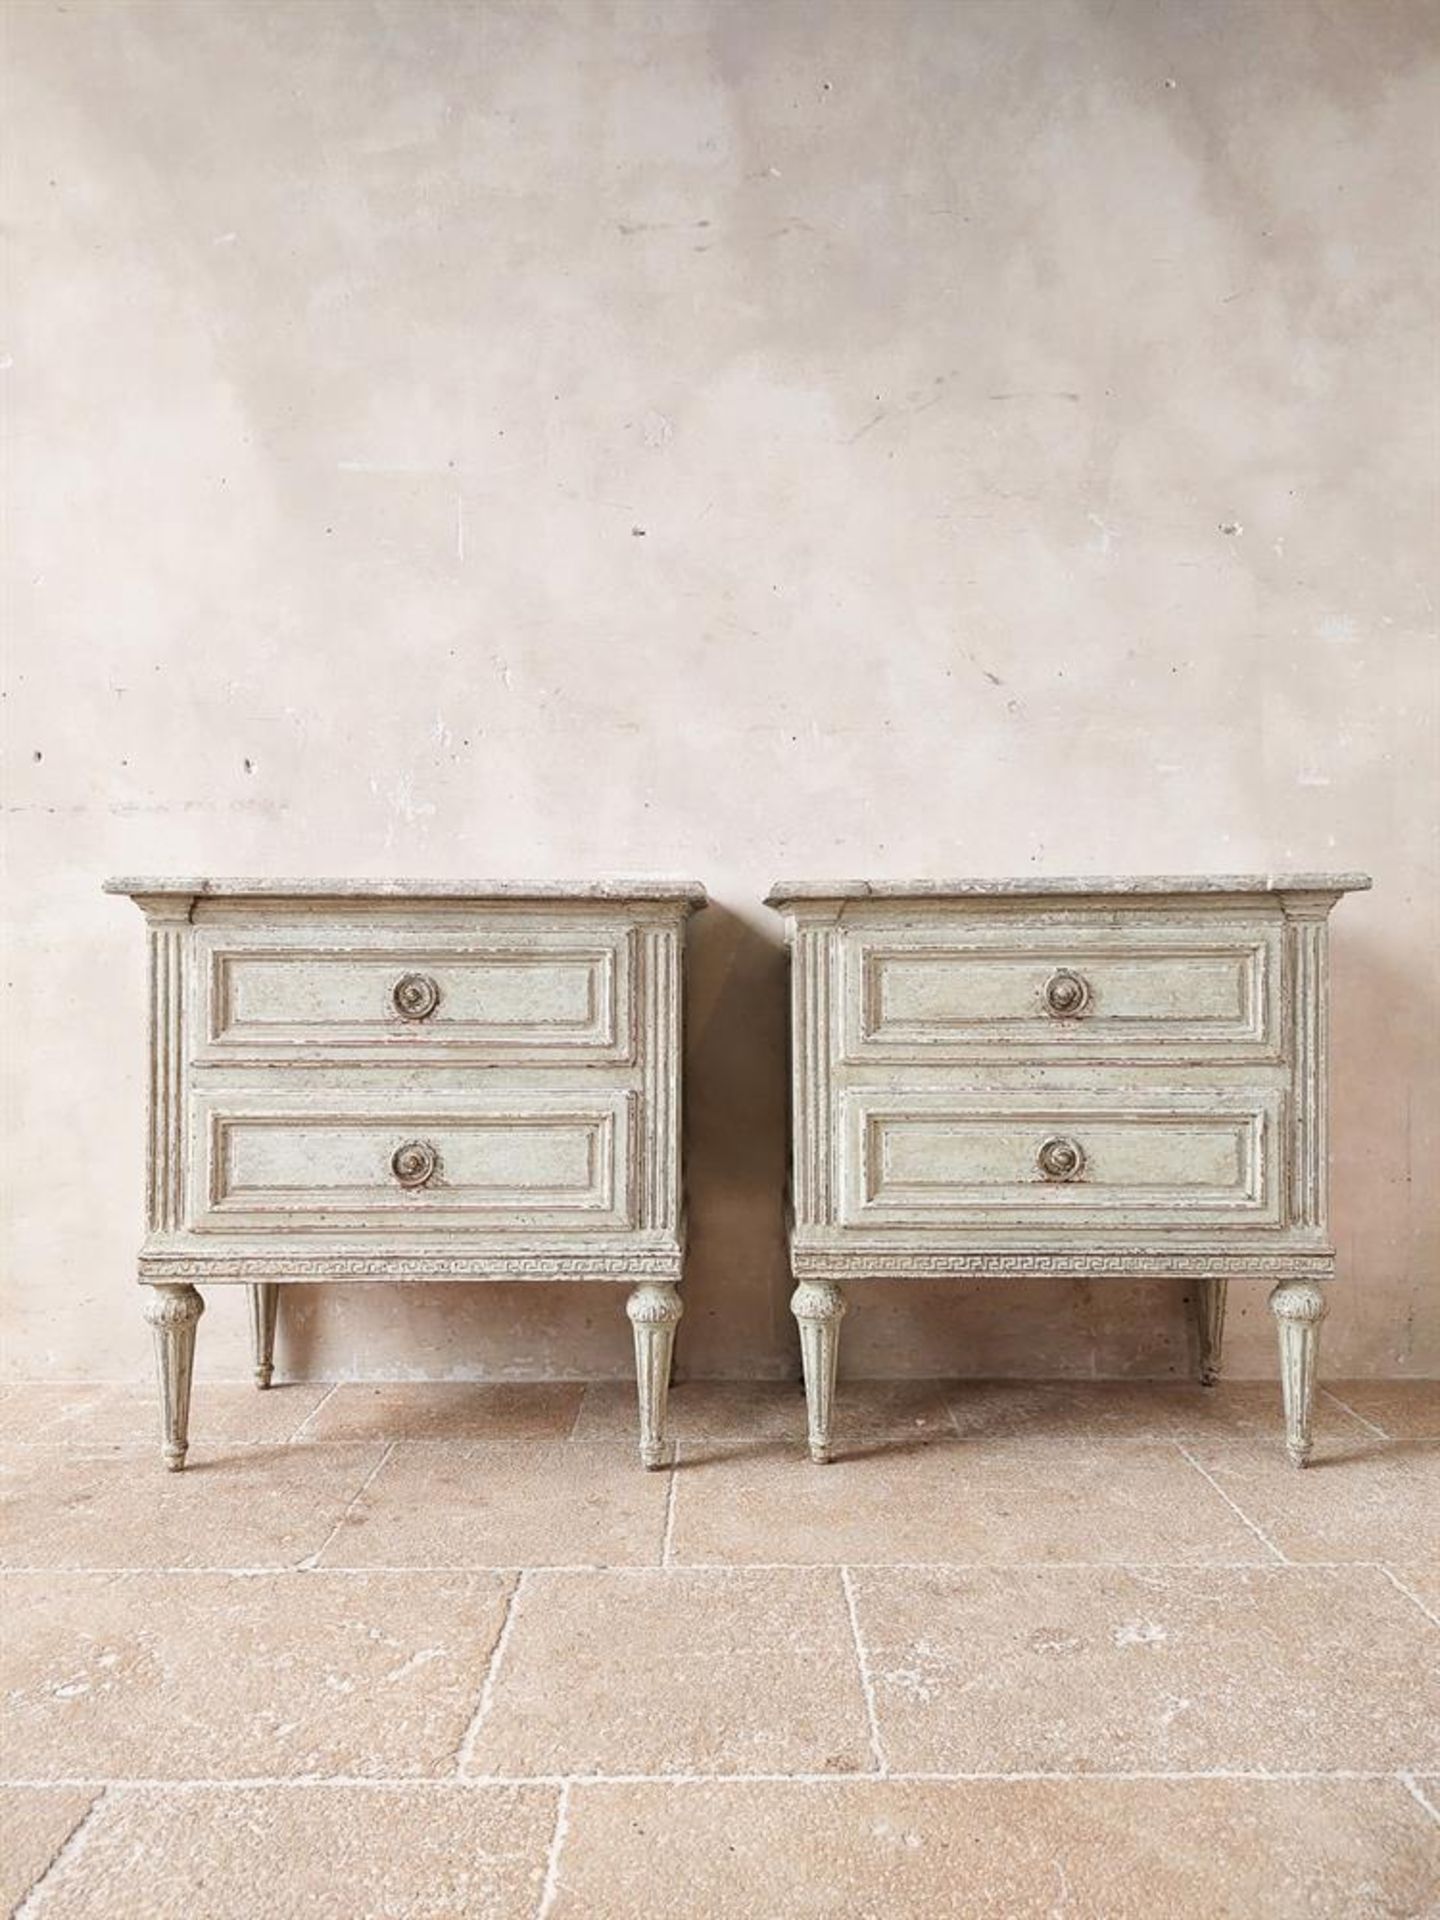 ‡ A PAIR OF FRENCH PAINTED BEDSIDE TABLES